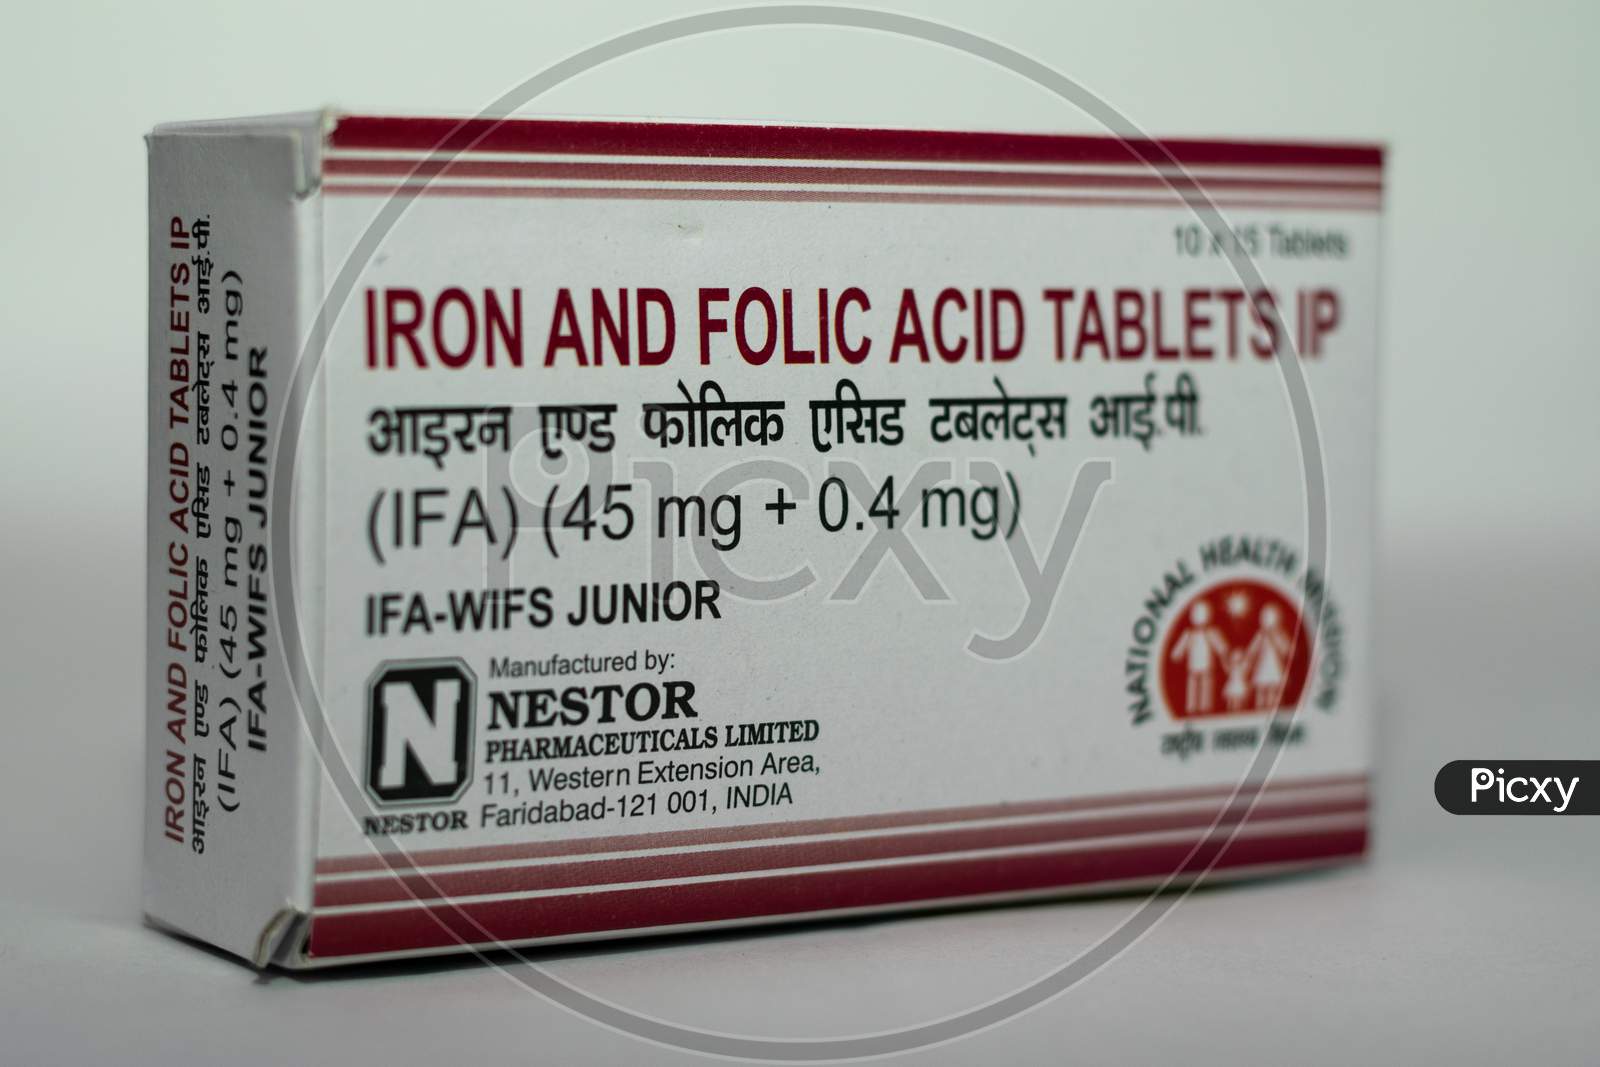 Image Of Iron And Folic Acid Tablets Provided Free By Government To Reduce The Prevalence And Severity Of Anaemia In Population 5 10 Years Rf Picxy